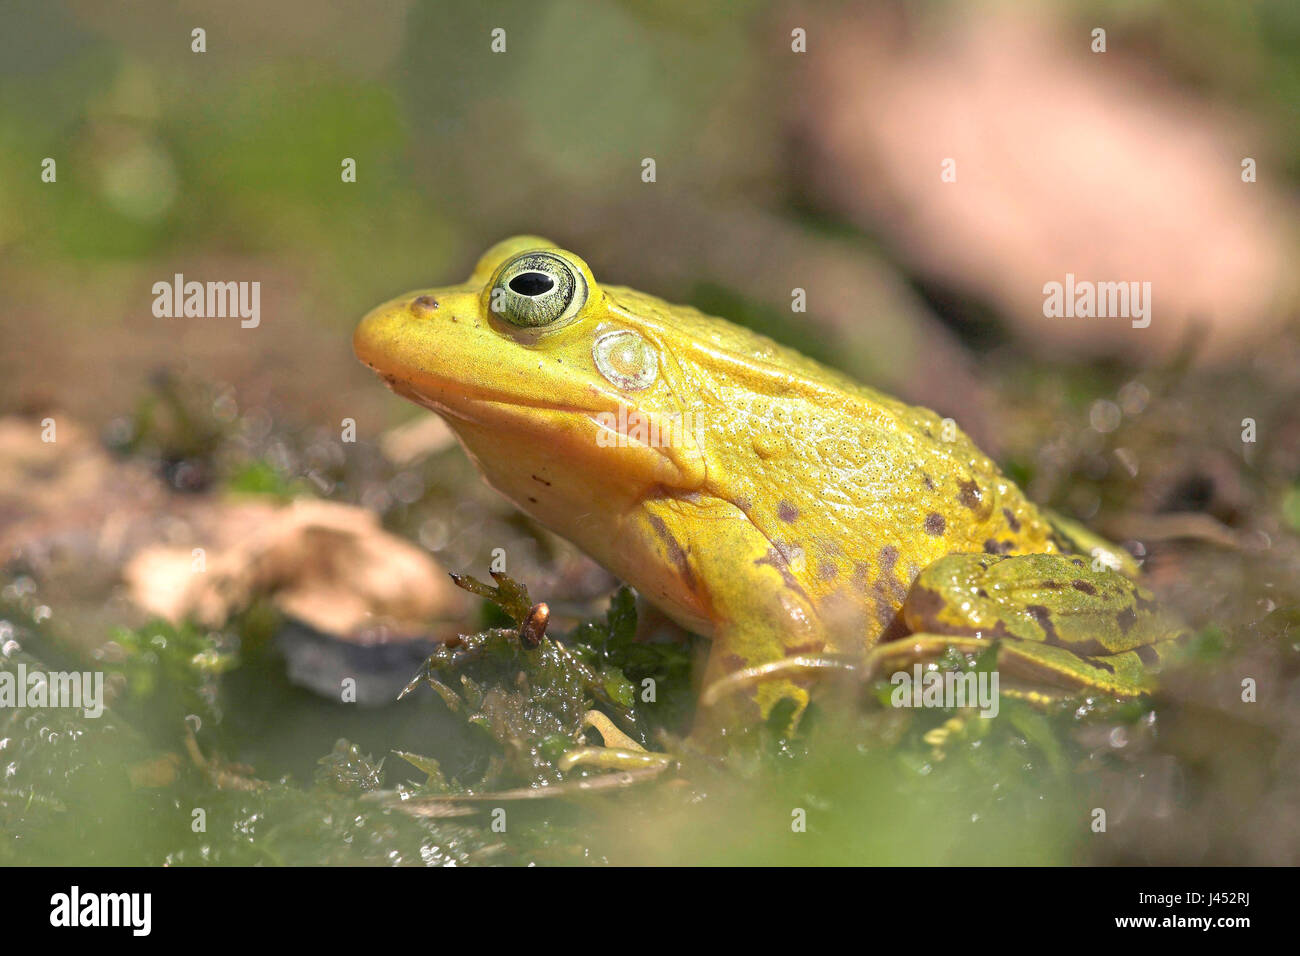 photo of a bright green male pool frog during breeding season Stock Photo